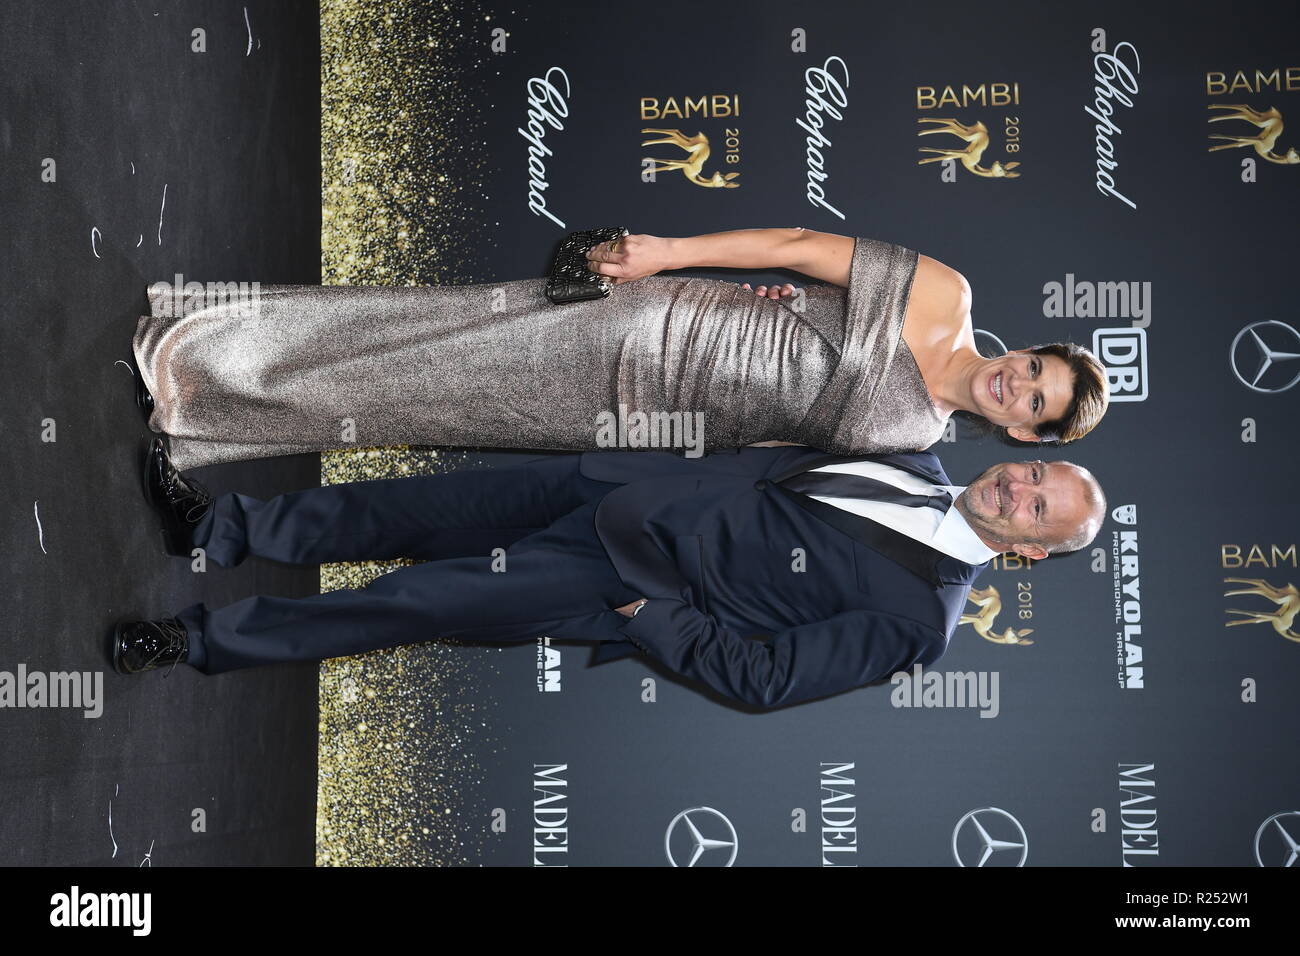 Berlin, Germany. 16th Nov, 2018. Heino Ferch and his wife Marie-Jeanette Ferch come to the Stage Theater for the 70th Bambi Media Award. Credit: Britta Pedersen/dpa-Zentralbild/dpa/Alamy Live News Stock Photo